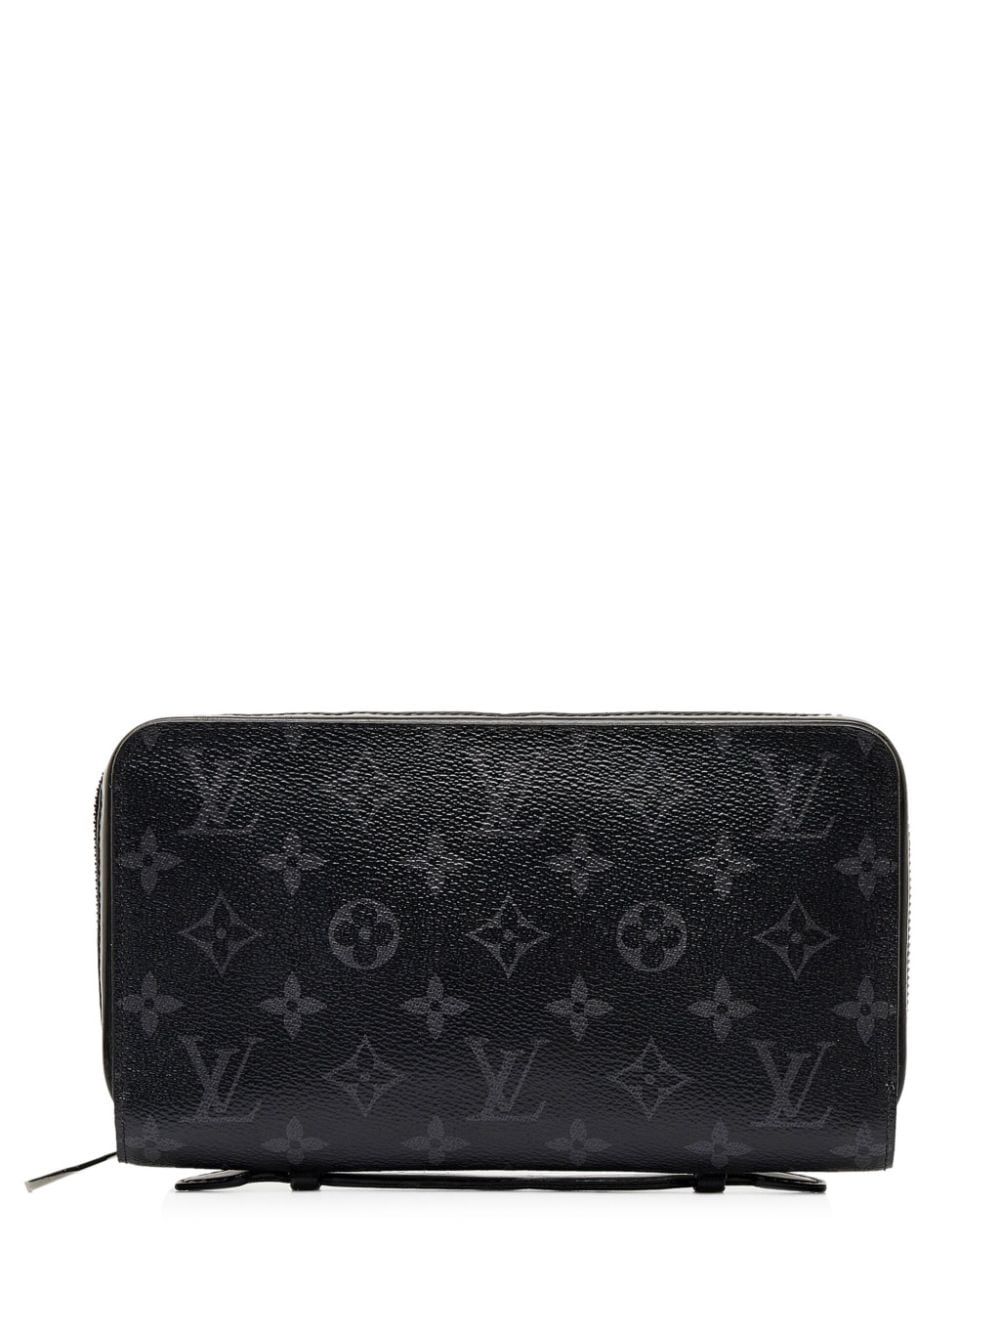 Image 1 of Louis Vuitton Pre-Owned 2018 pre-owned large Zippy Organiser wallet